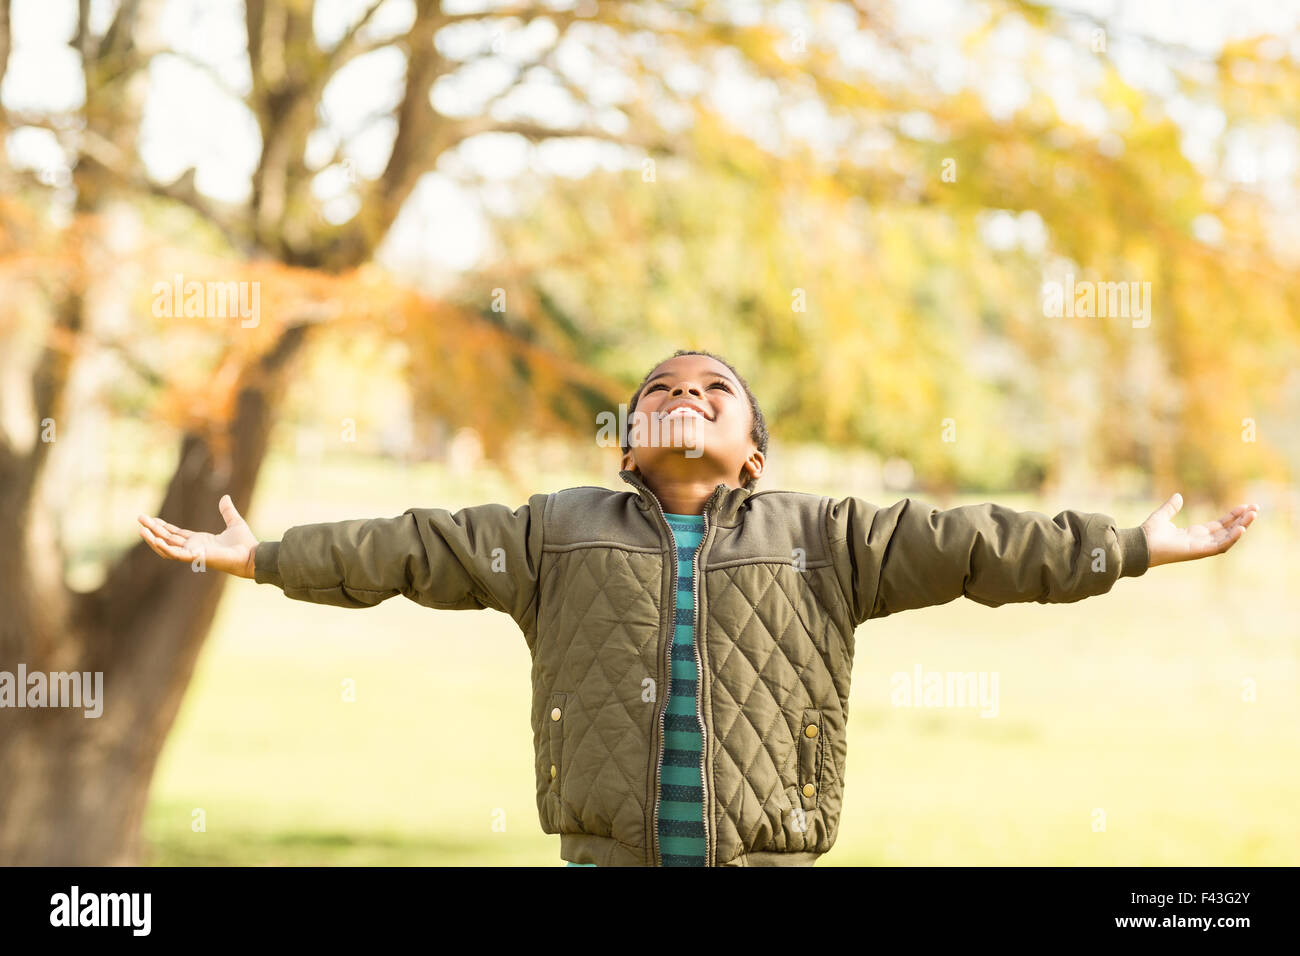 Portrait of a little boy with outstretched arms Stock Photo